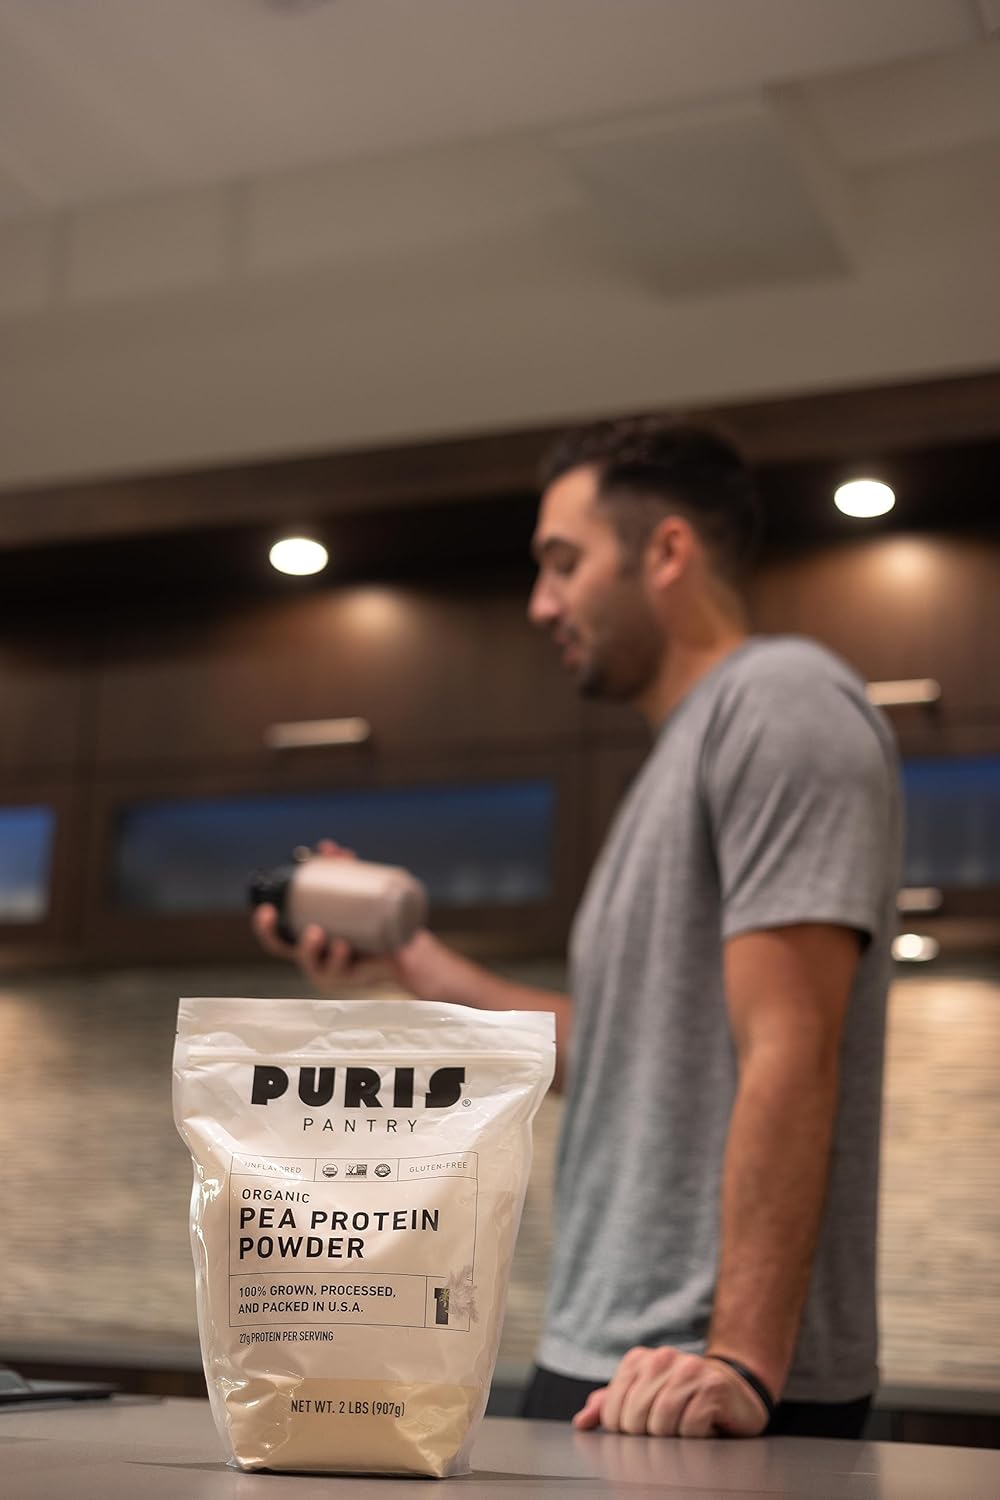 PURIS® Organic Pea Protein Powder, 100% Grown, Processed and Packed in